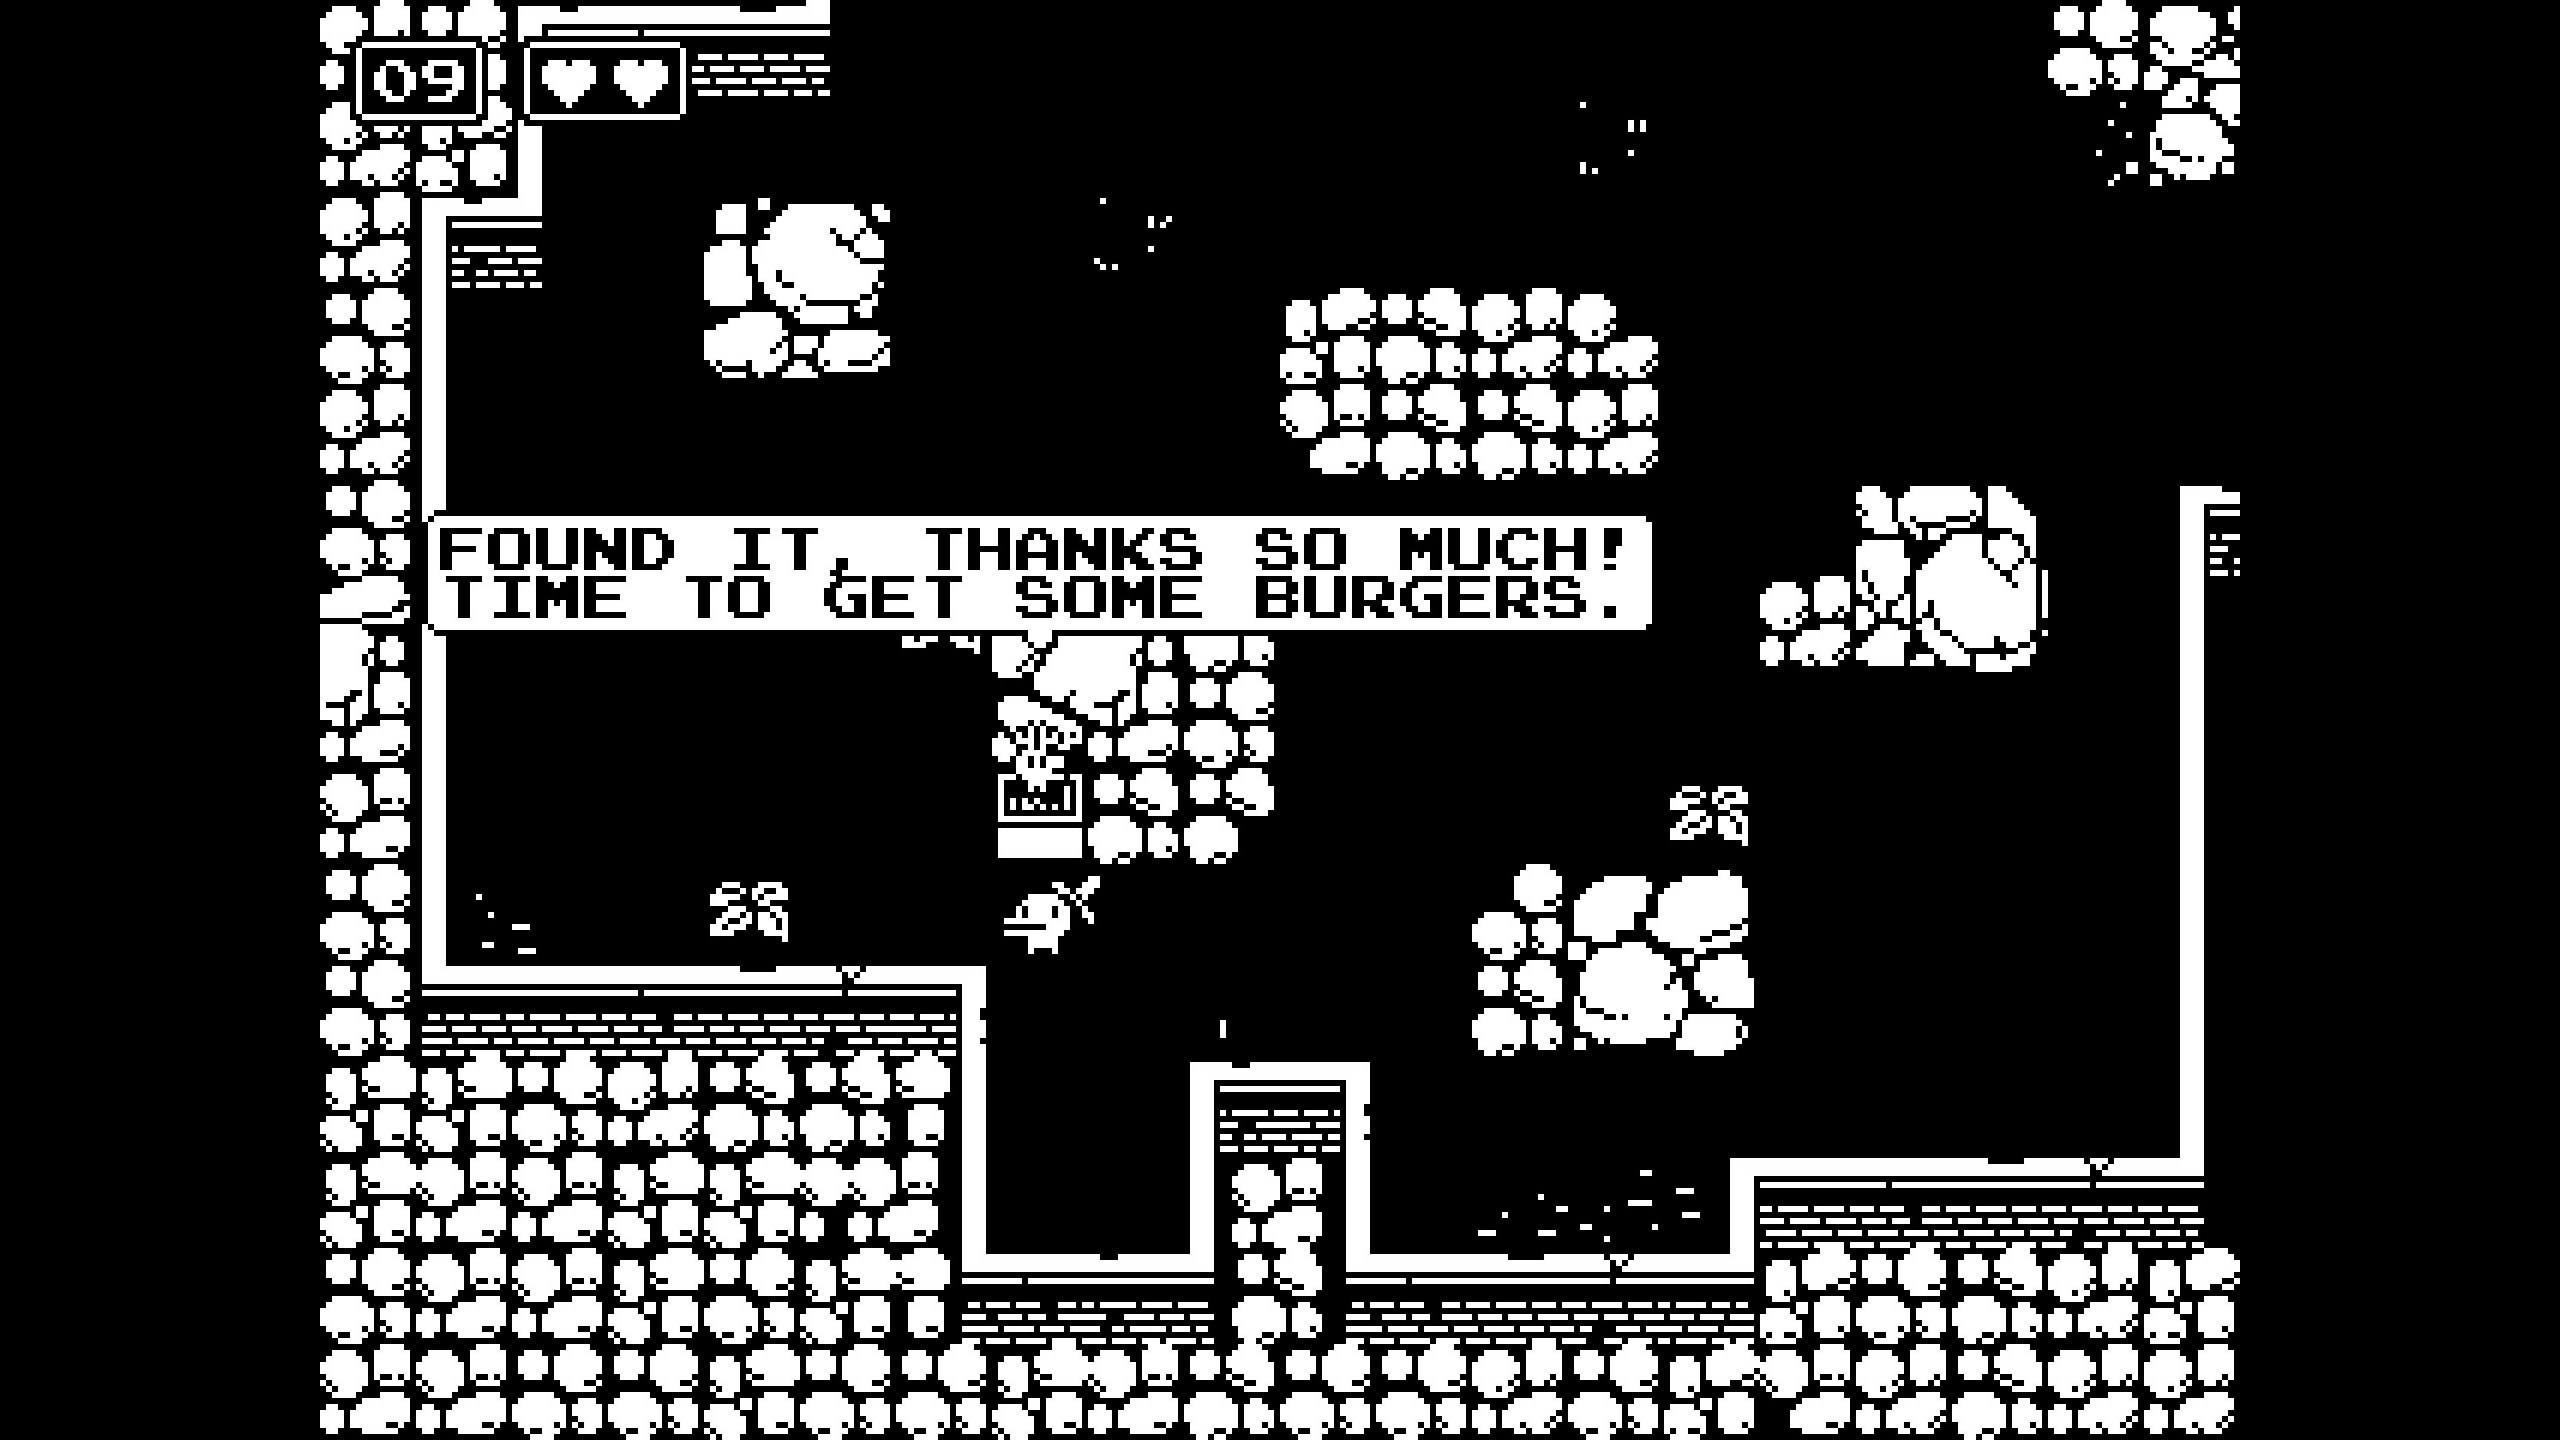 Minit Review - Gone In 60 Seconds - GameSpot